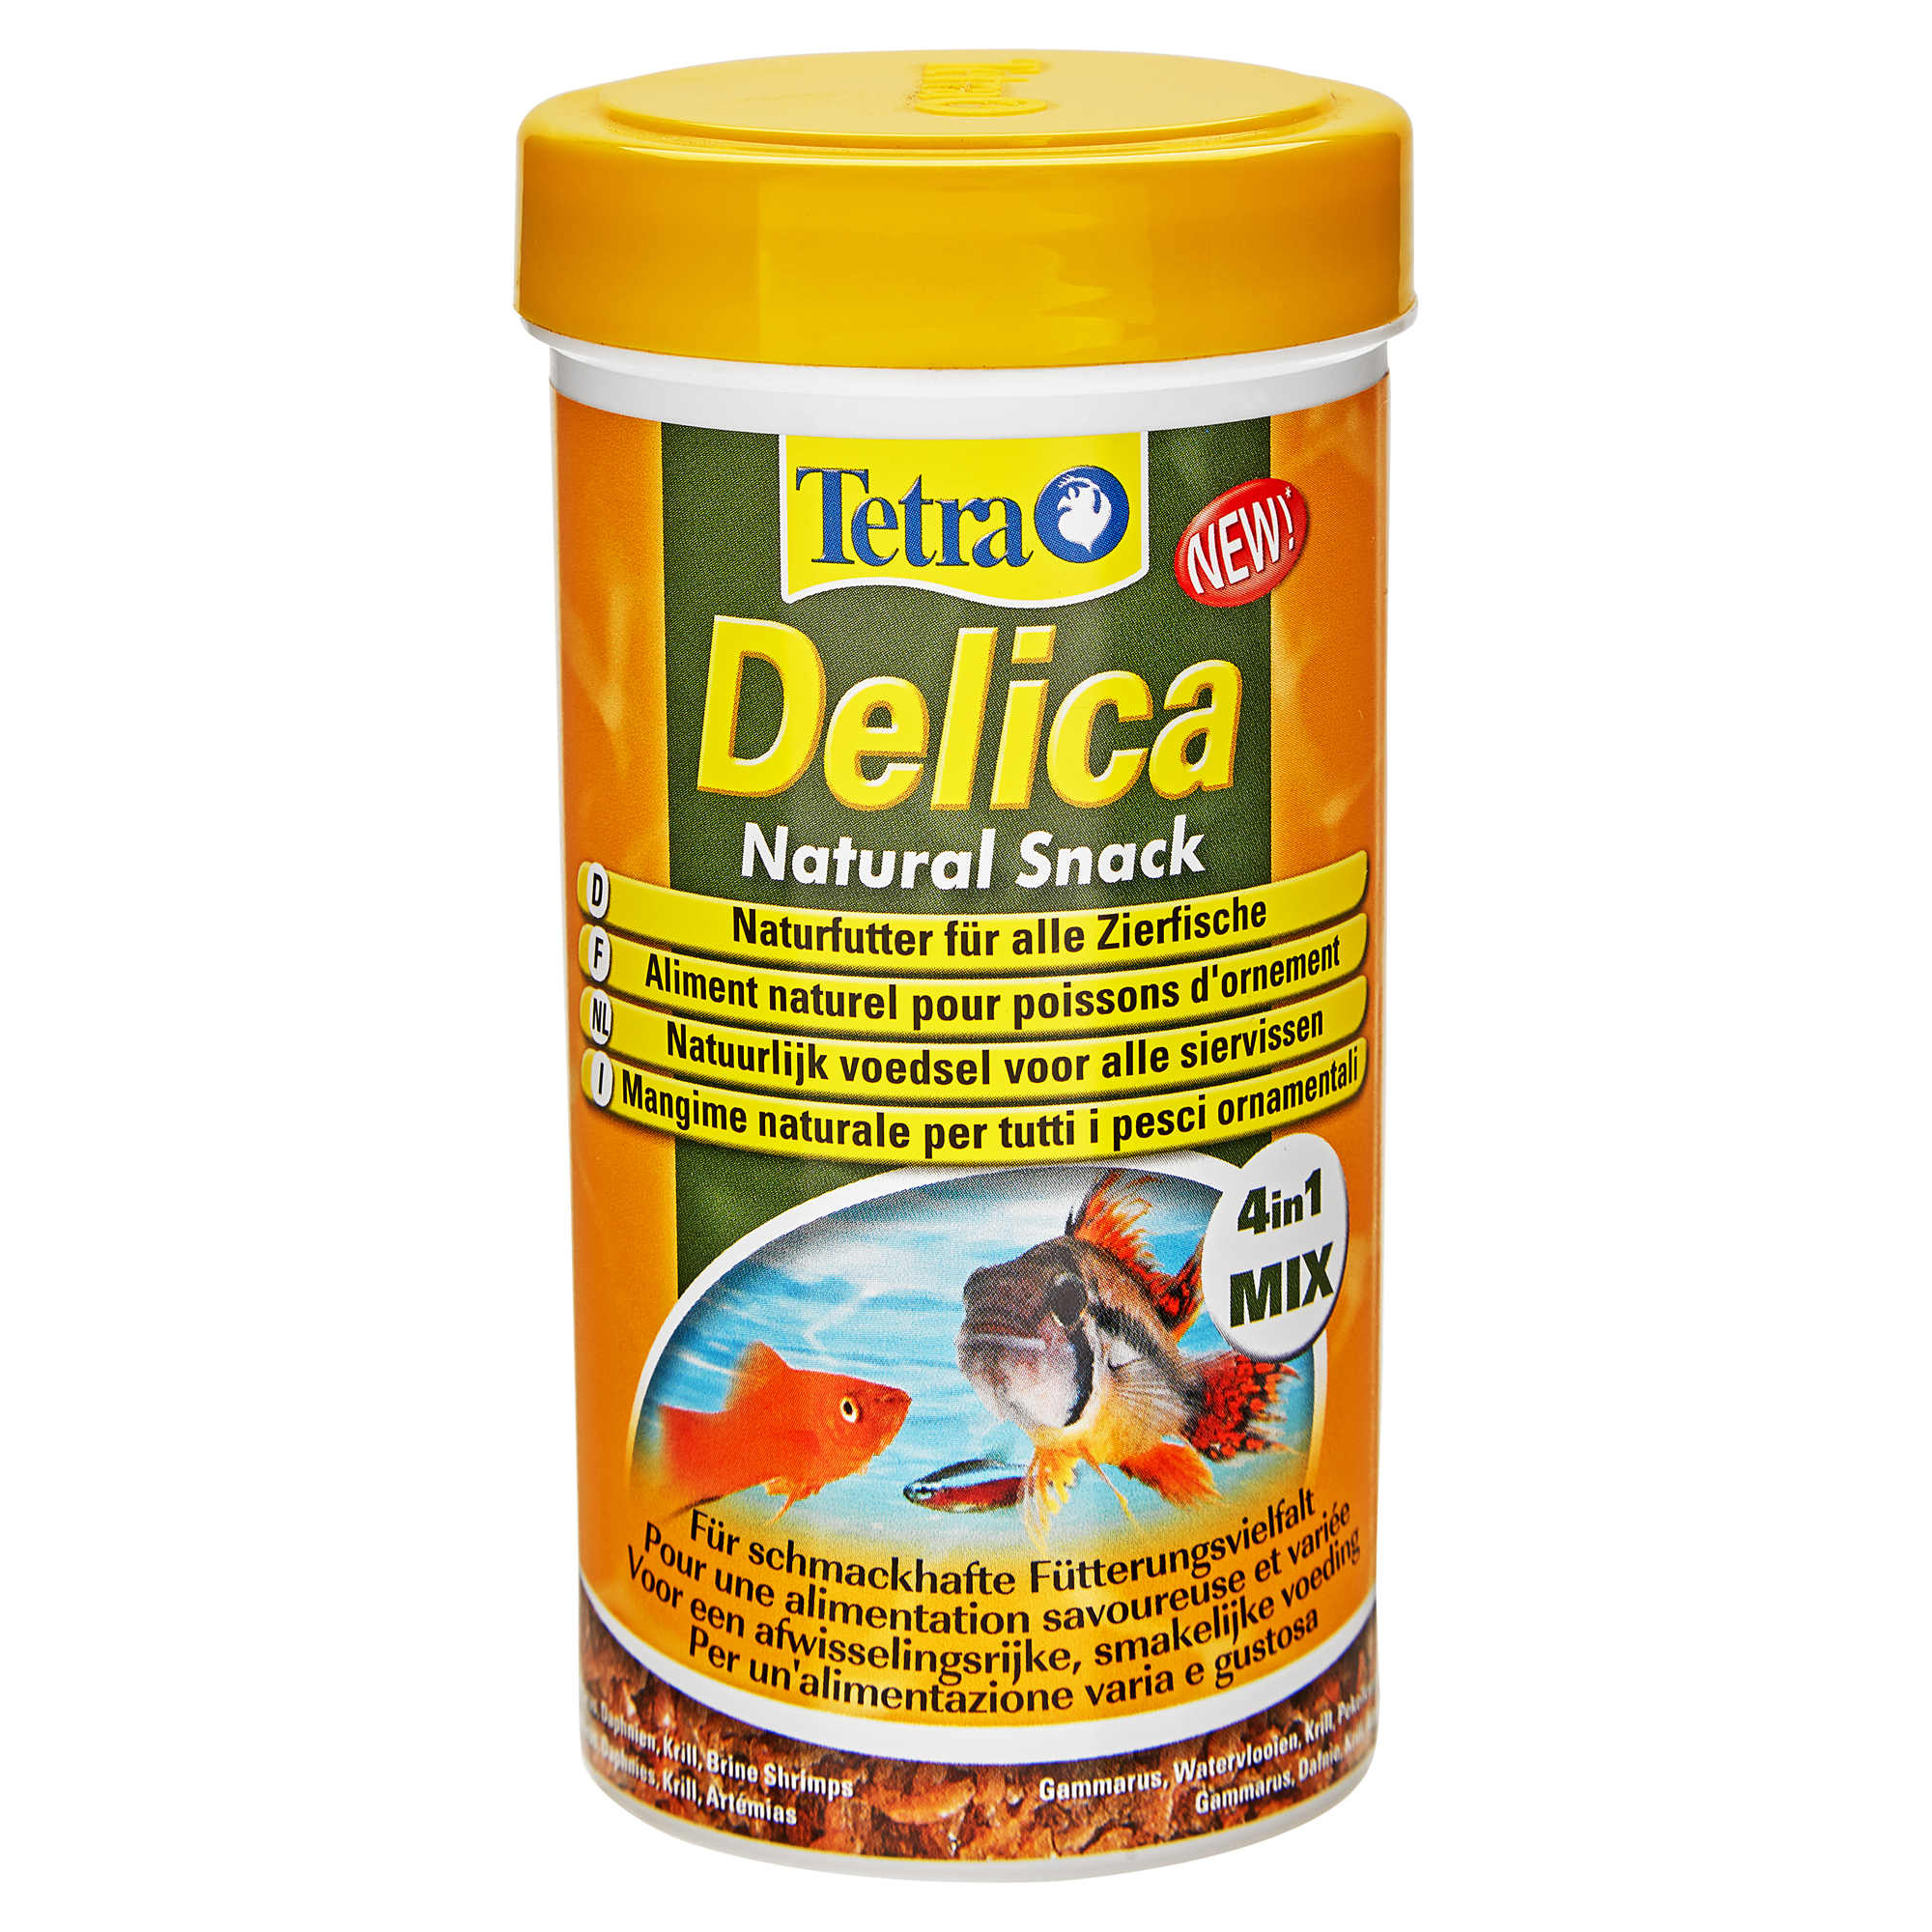 Fischfutter "Delica" Natural Snack 0,03 kg + product picture